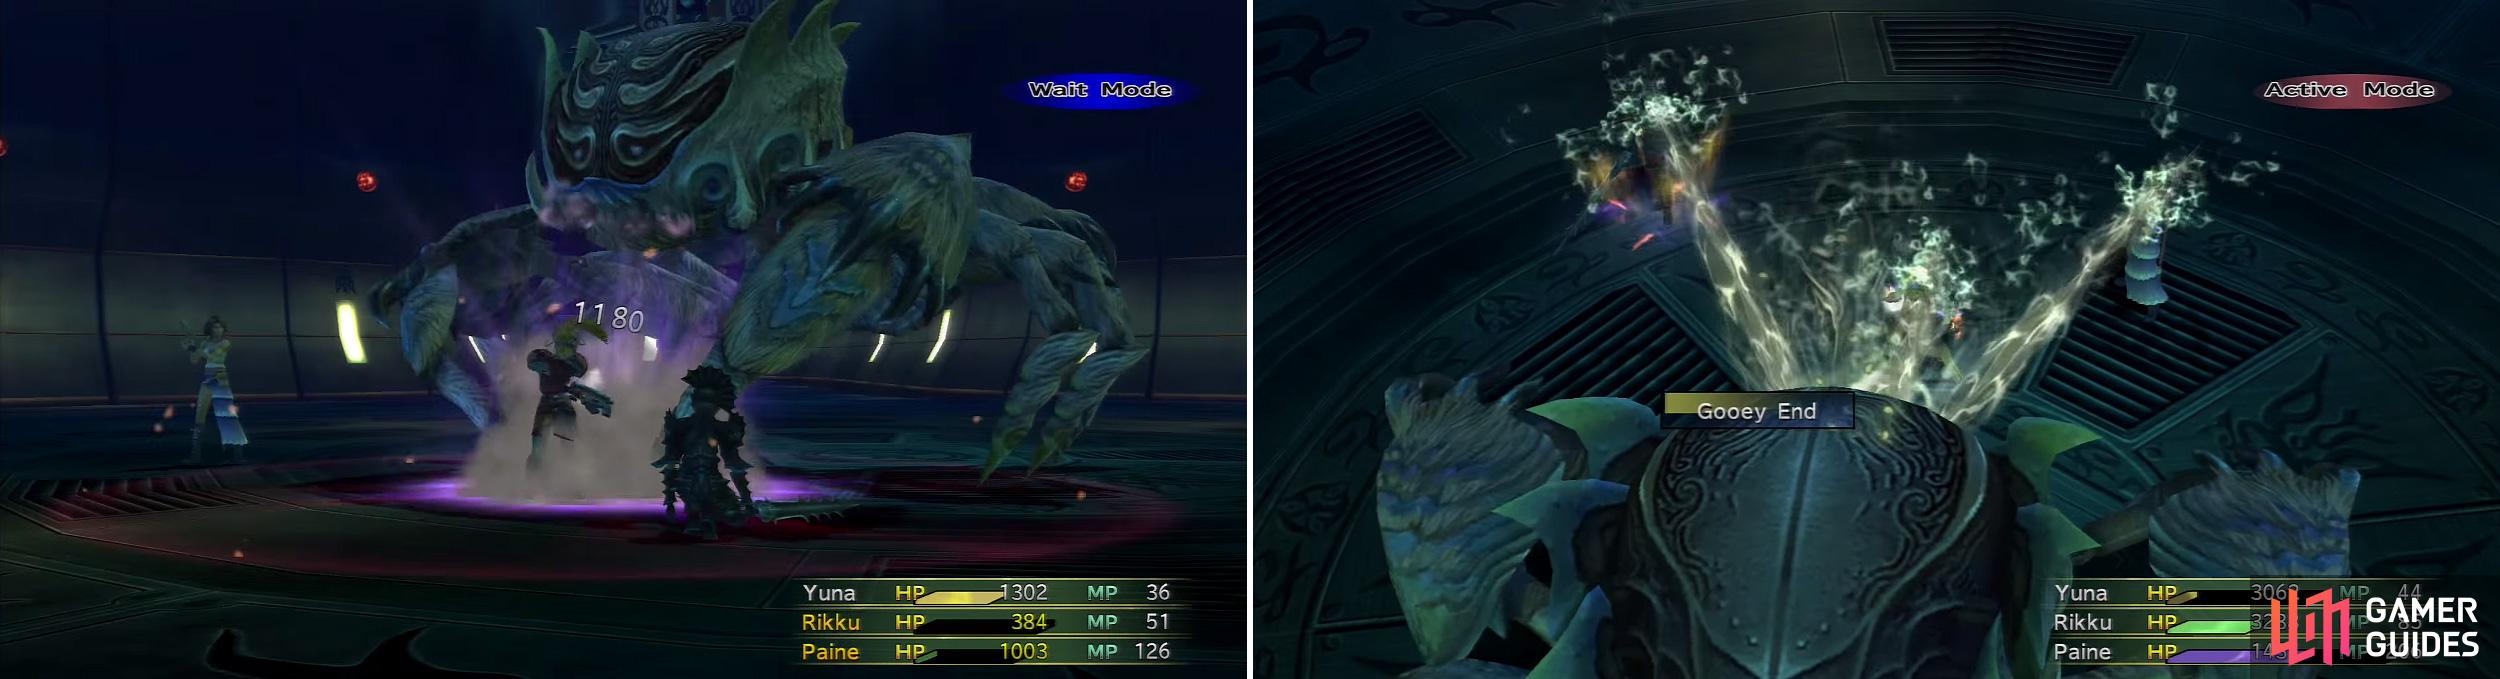 Aranea is a stronger version of Boris, the giant crab. It uses Spider Bite (left) and Gooey End (right) which is a stronger version of Sticky End. He isn’t difficult.